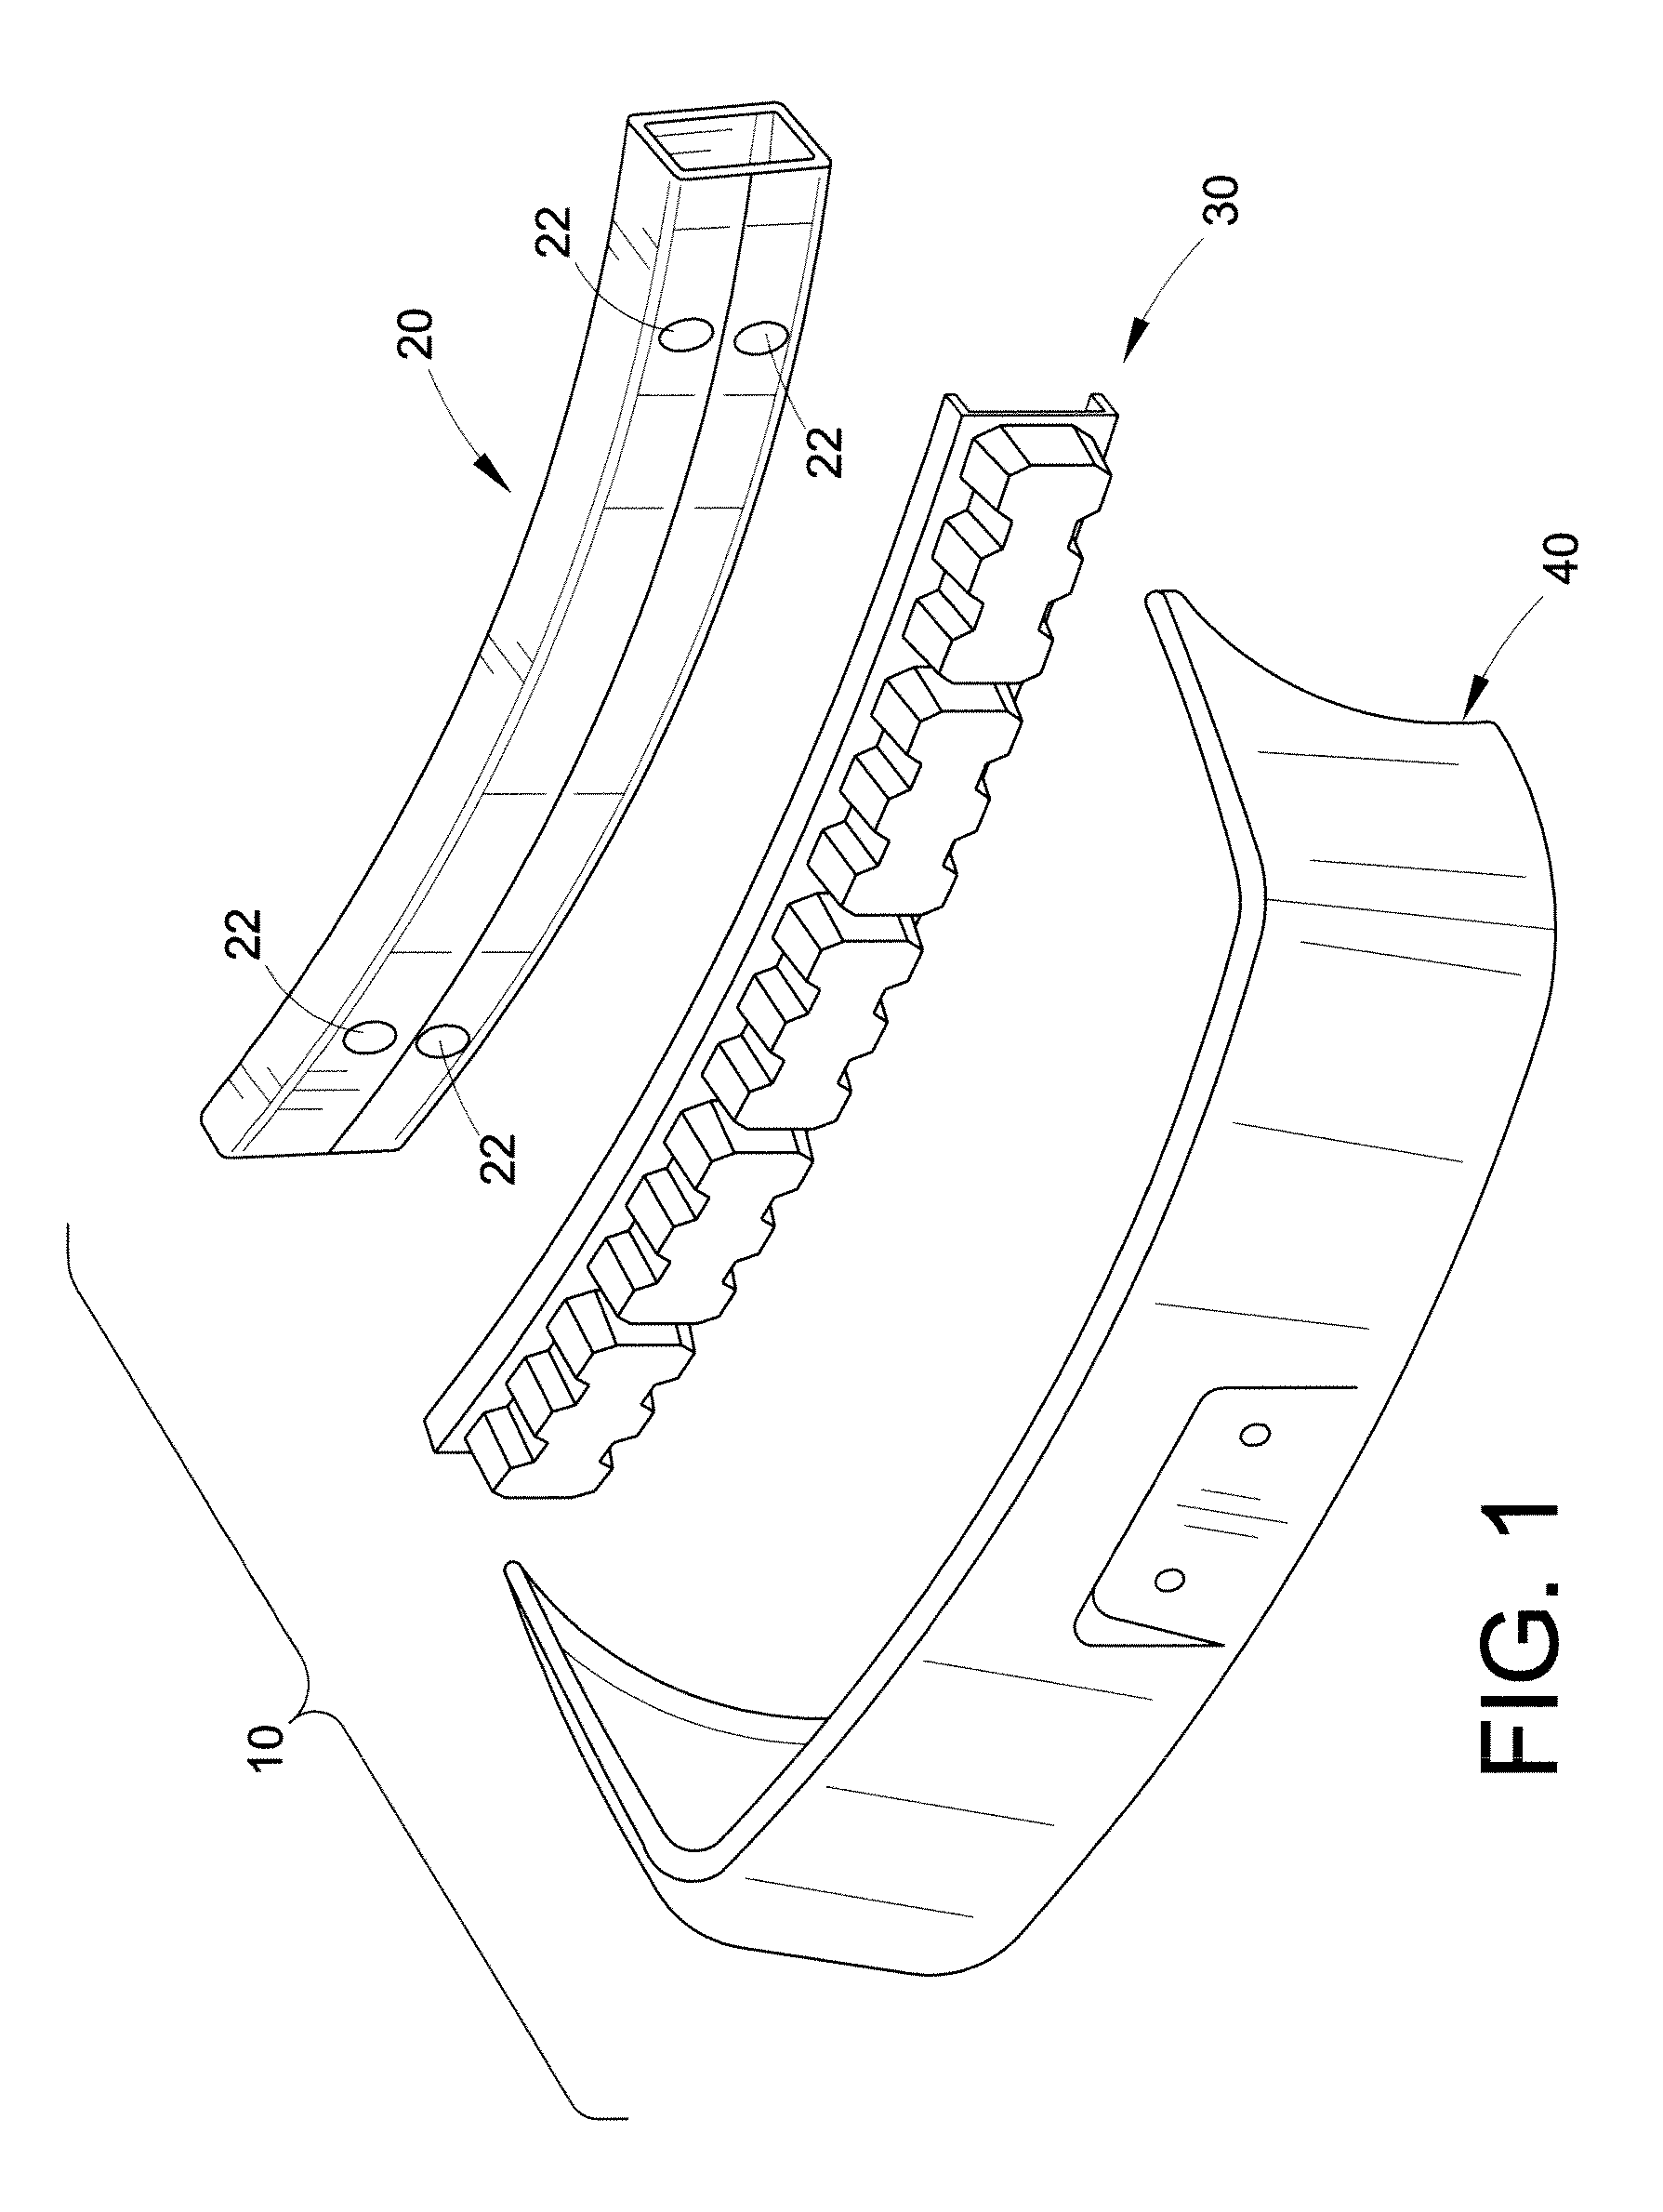 Vehicle bumper system with energy absorber